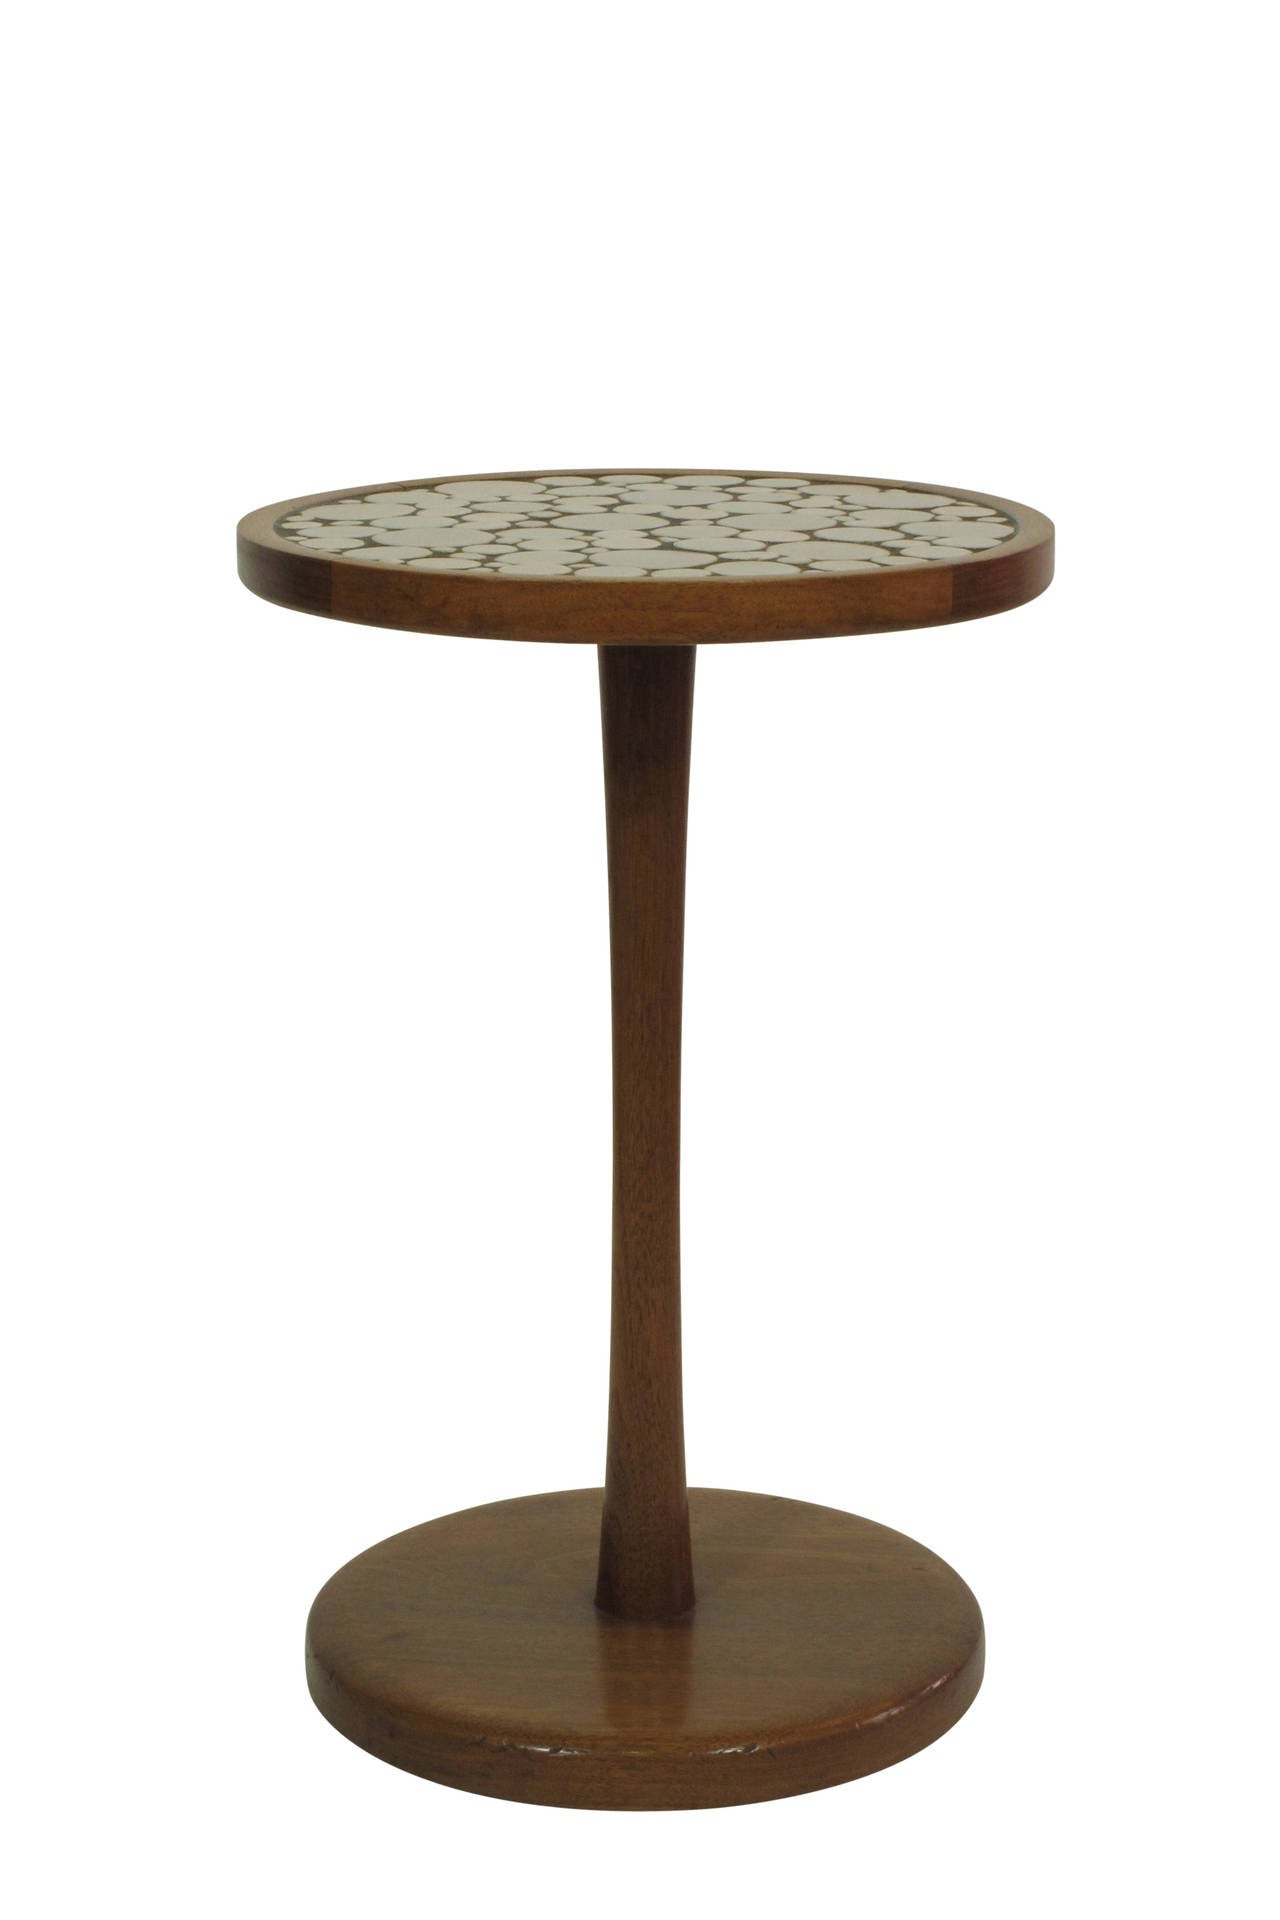 Iconic table with 11.5 inch diameter top. Walnut frame with weighted base.